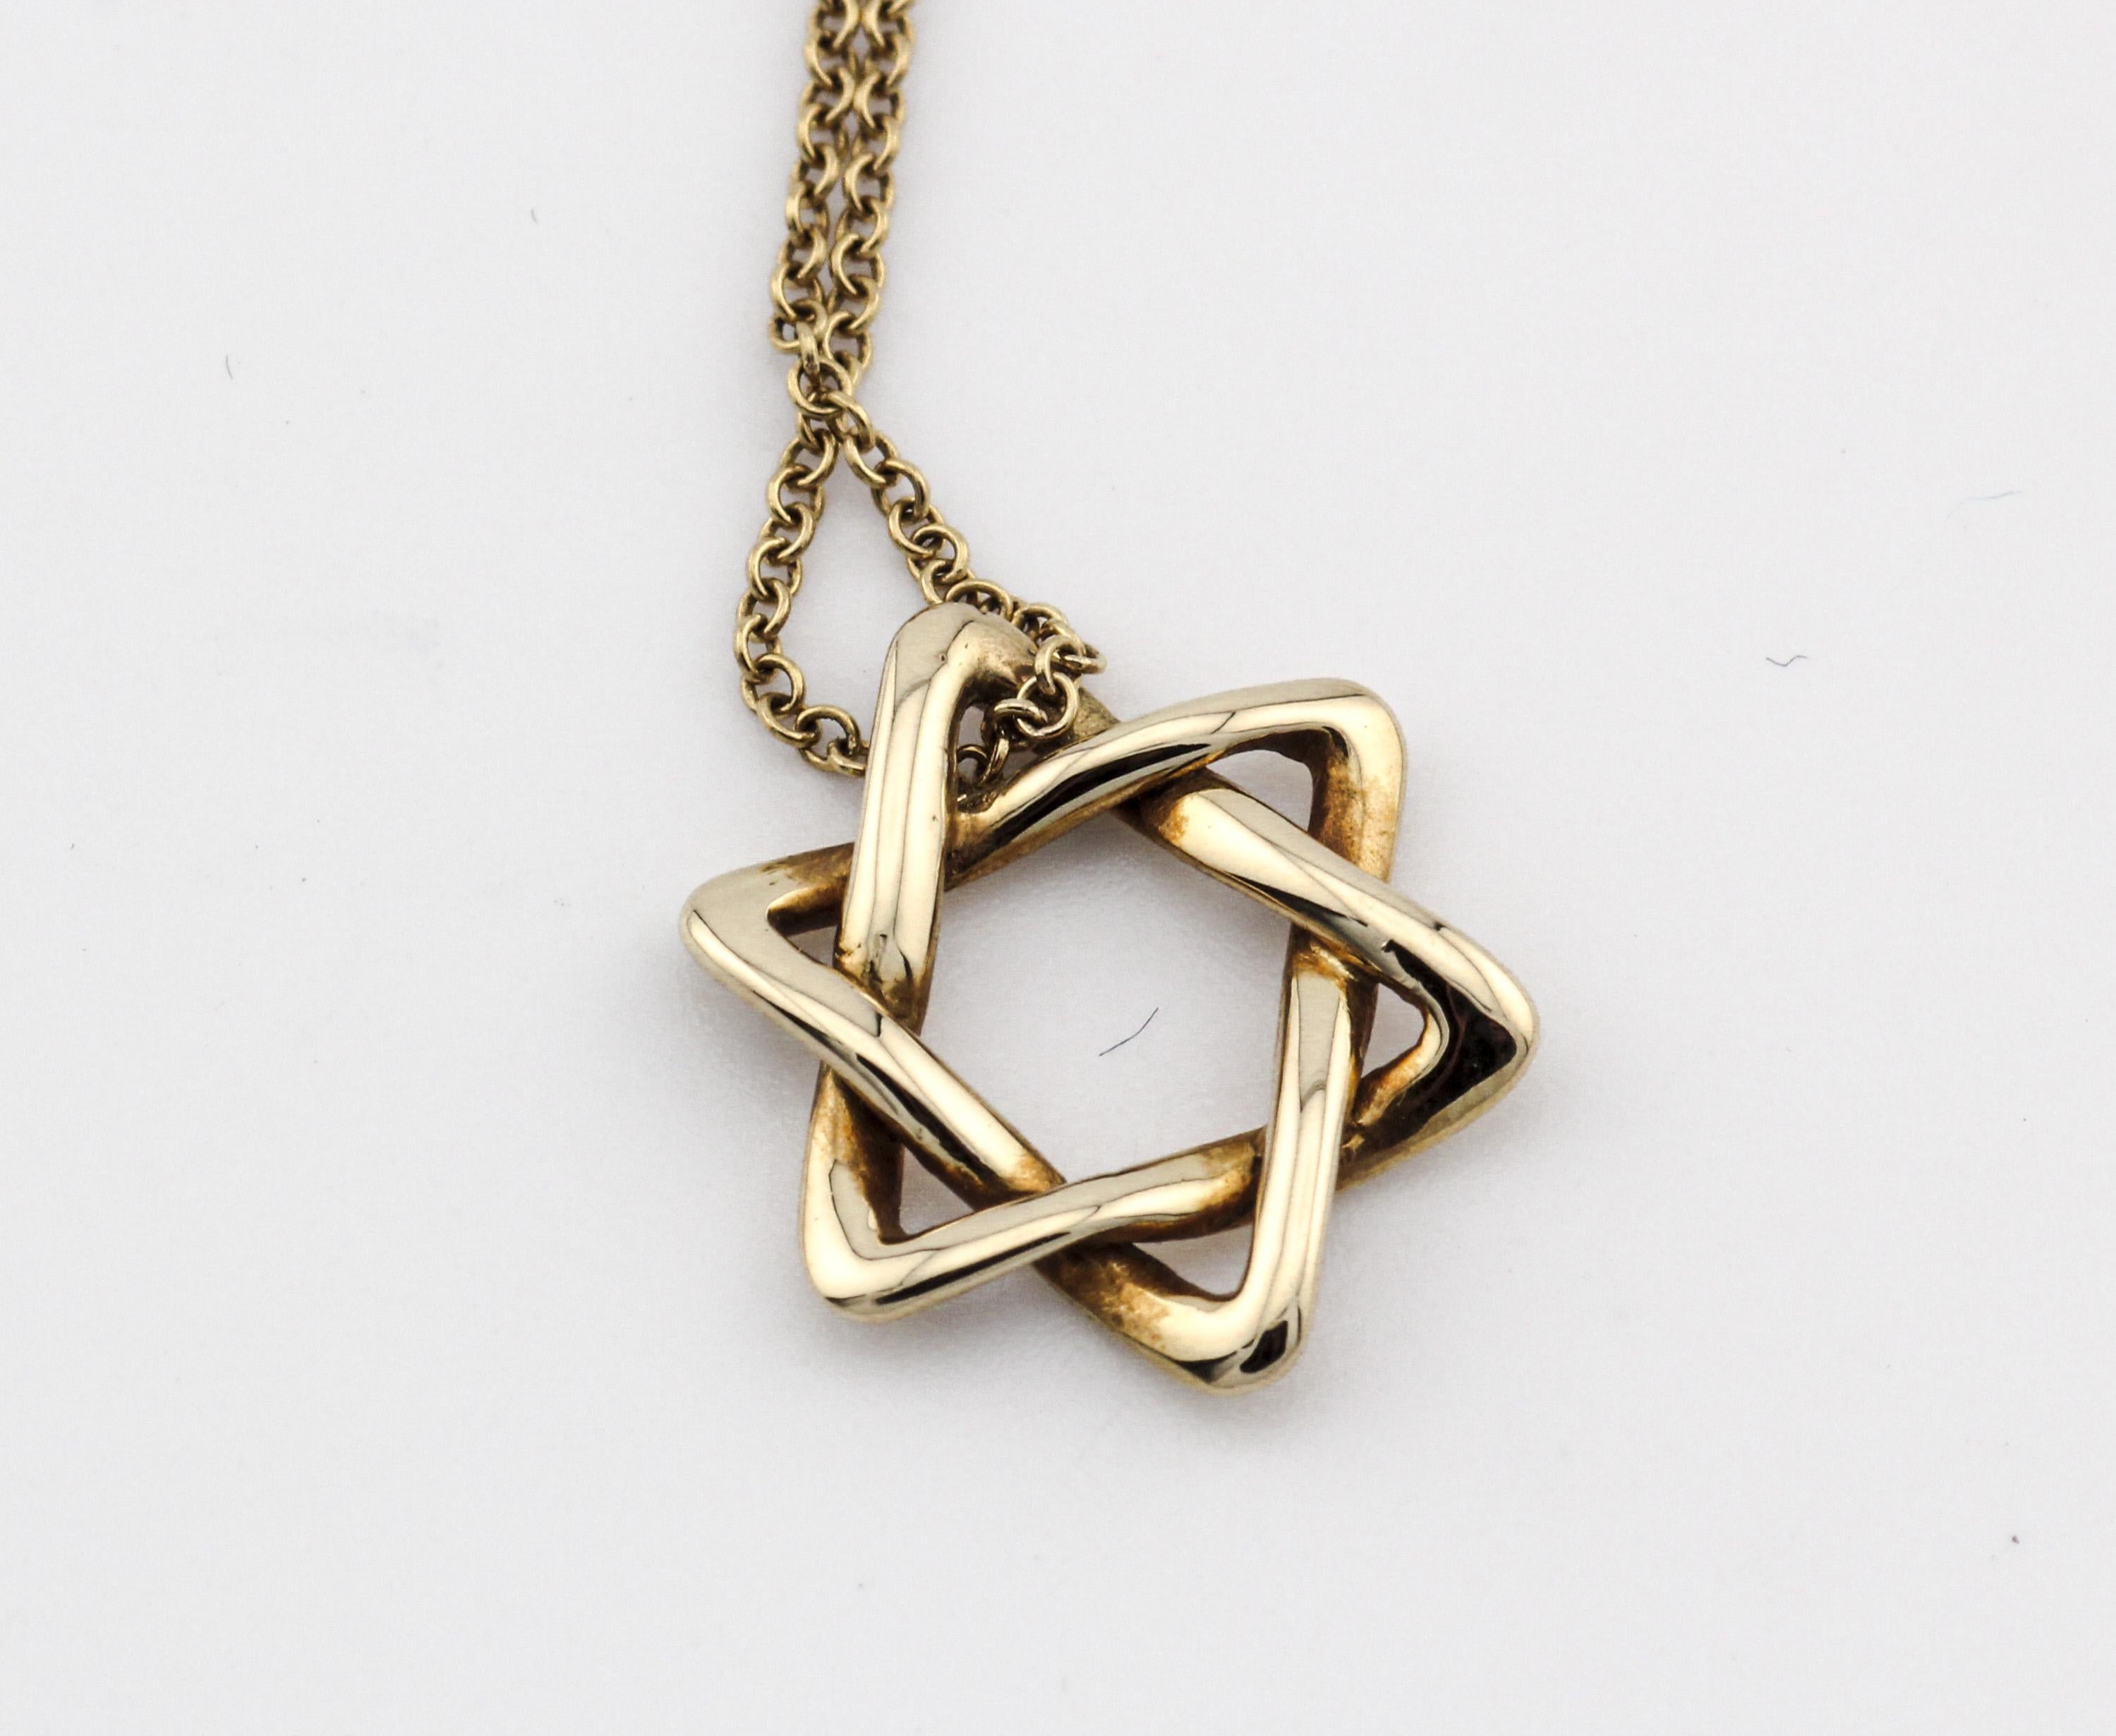 The Tiffany & Co. Elsa Peretti Star of David 18K Yellow Gold Necklace Pendant is a dazzling and meaningful piece of jewelry that beautifully combines iconic design with exquisite craftsmanship. This pendant is part of the celebrated Elsa Peretti